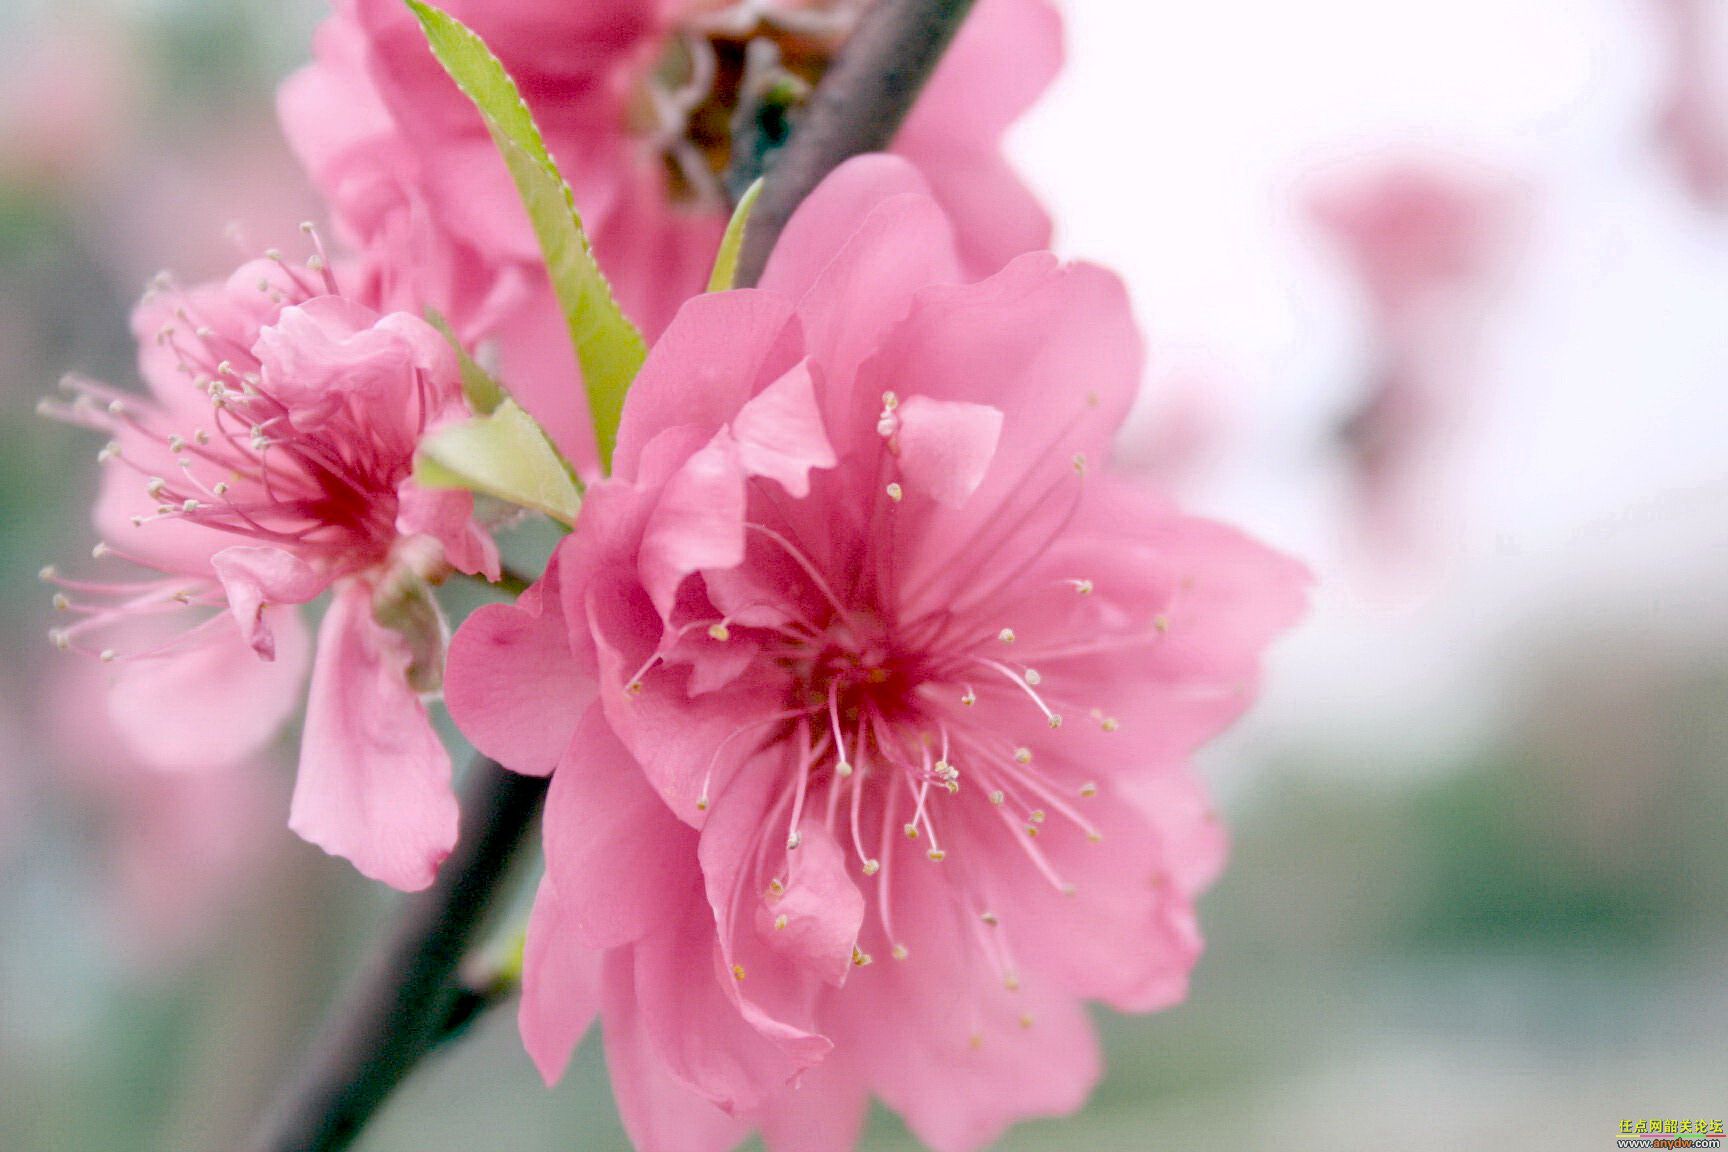 Peach blossom photos Trees and Flowers Pictures